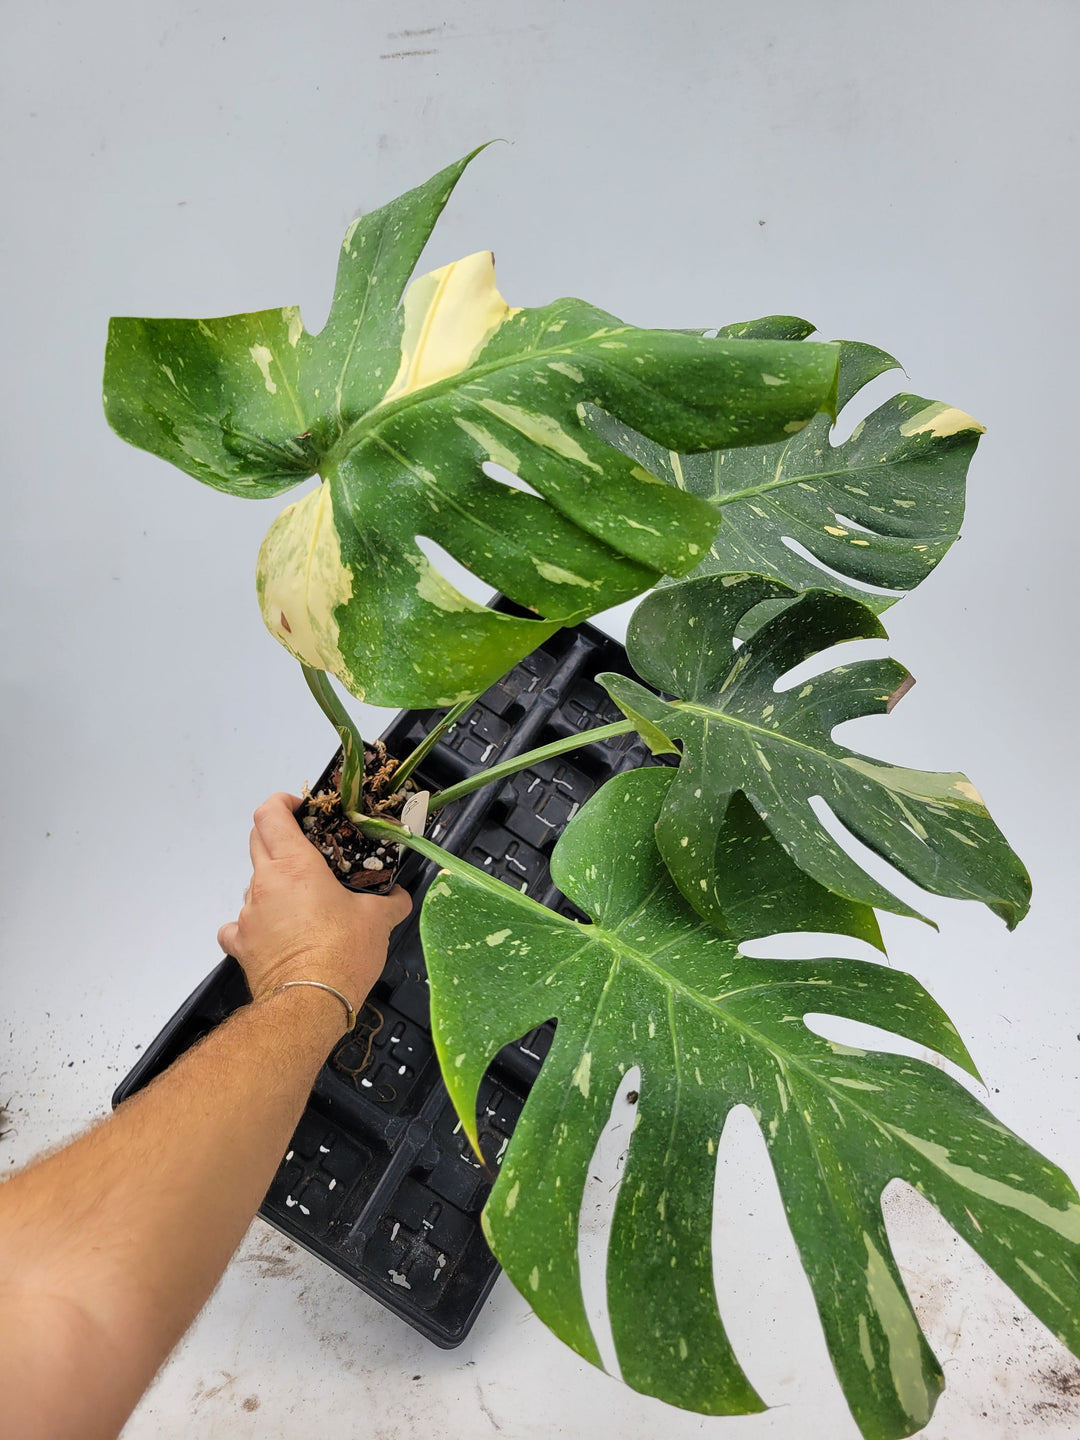 Monstera Thai Constellation,  XL size,  Highly variegated, Japanese Cultivar, exact plant pictured  US Seller #t31